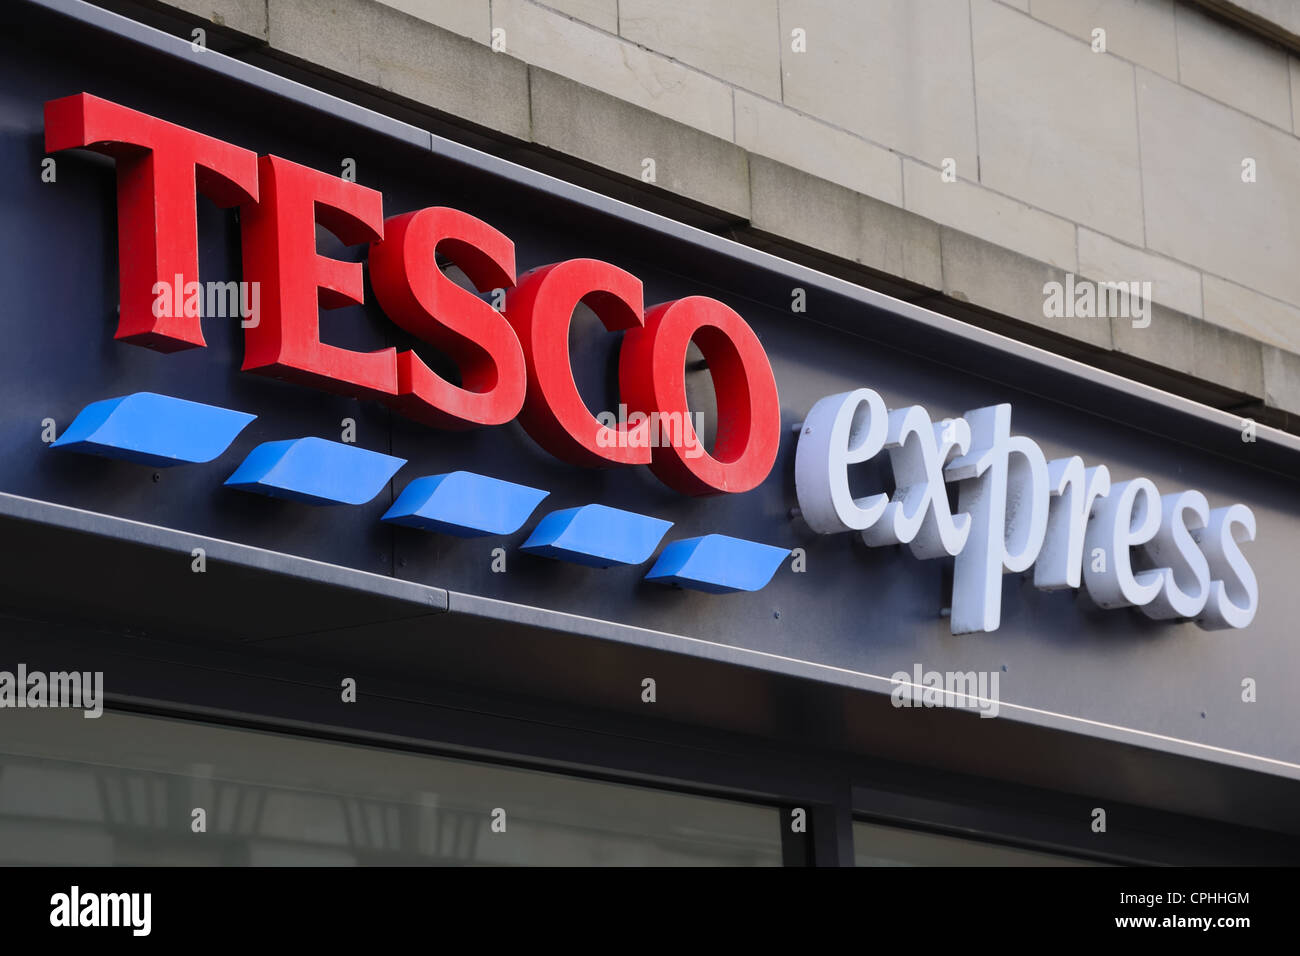 Tesco express sign above shop in Glasgow. Stock Photo